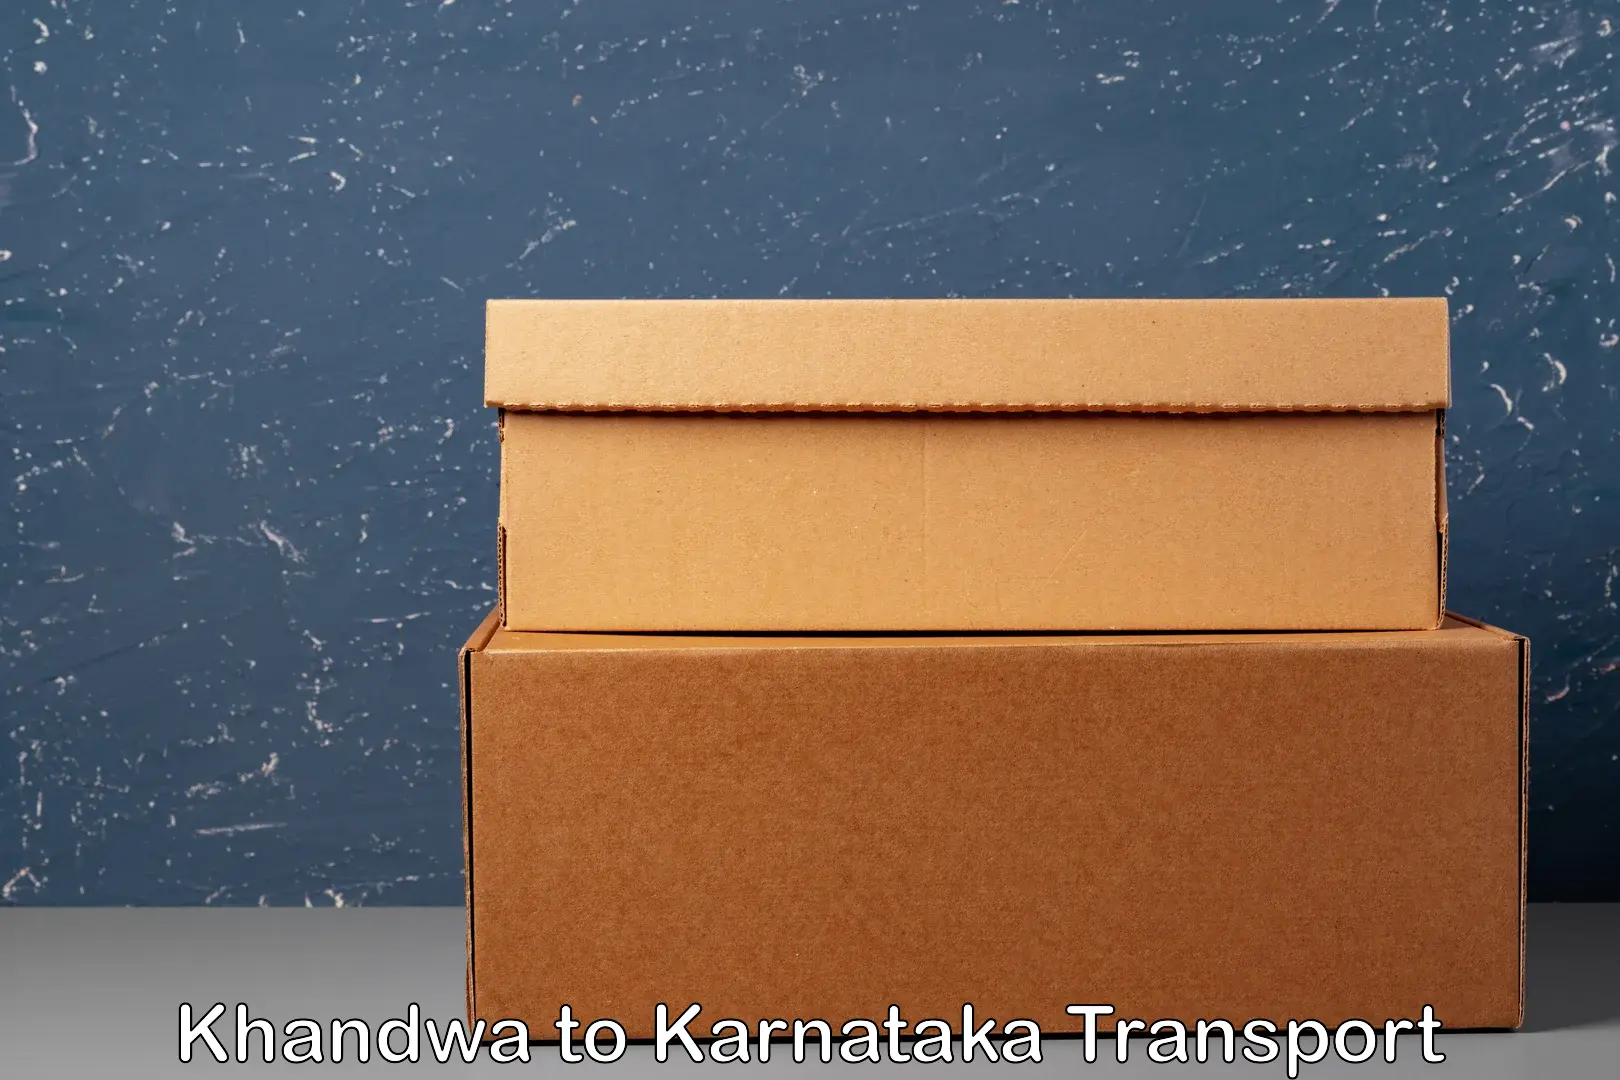 Container transport service Khandwa to Lingasugur